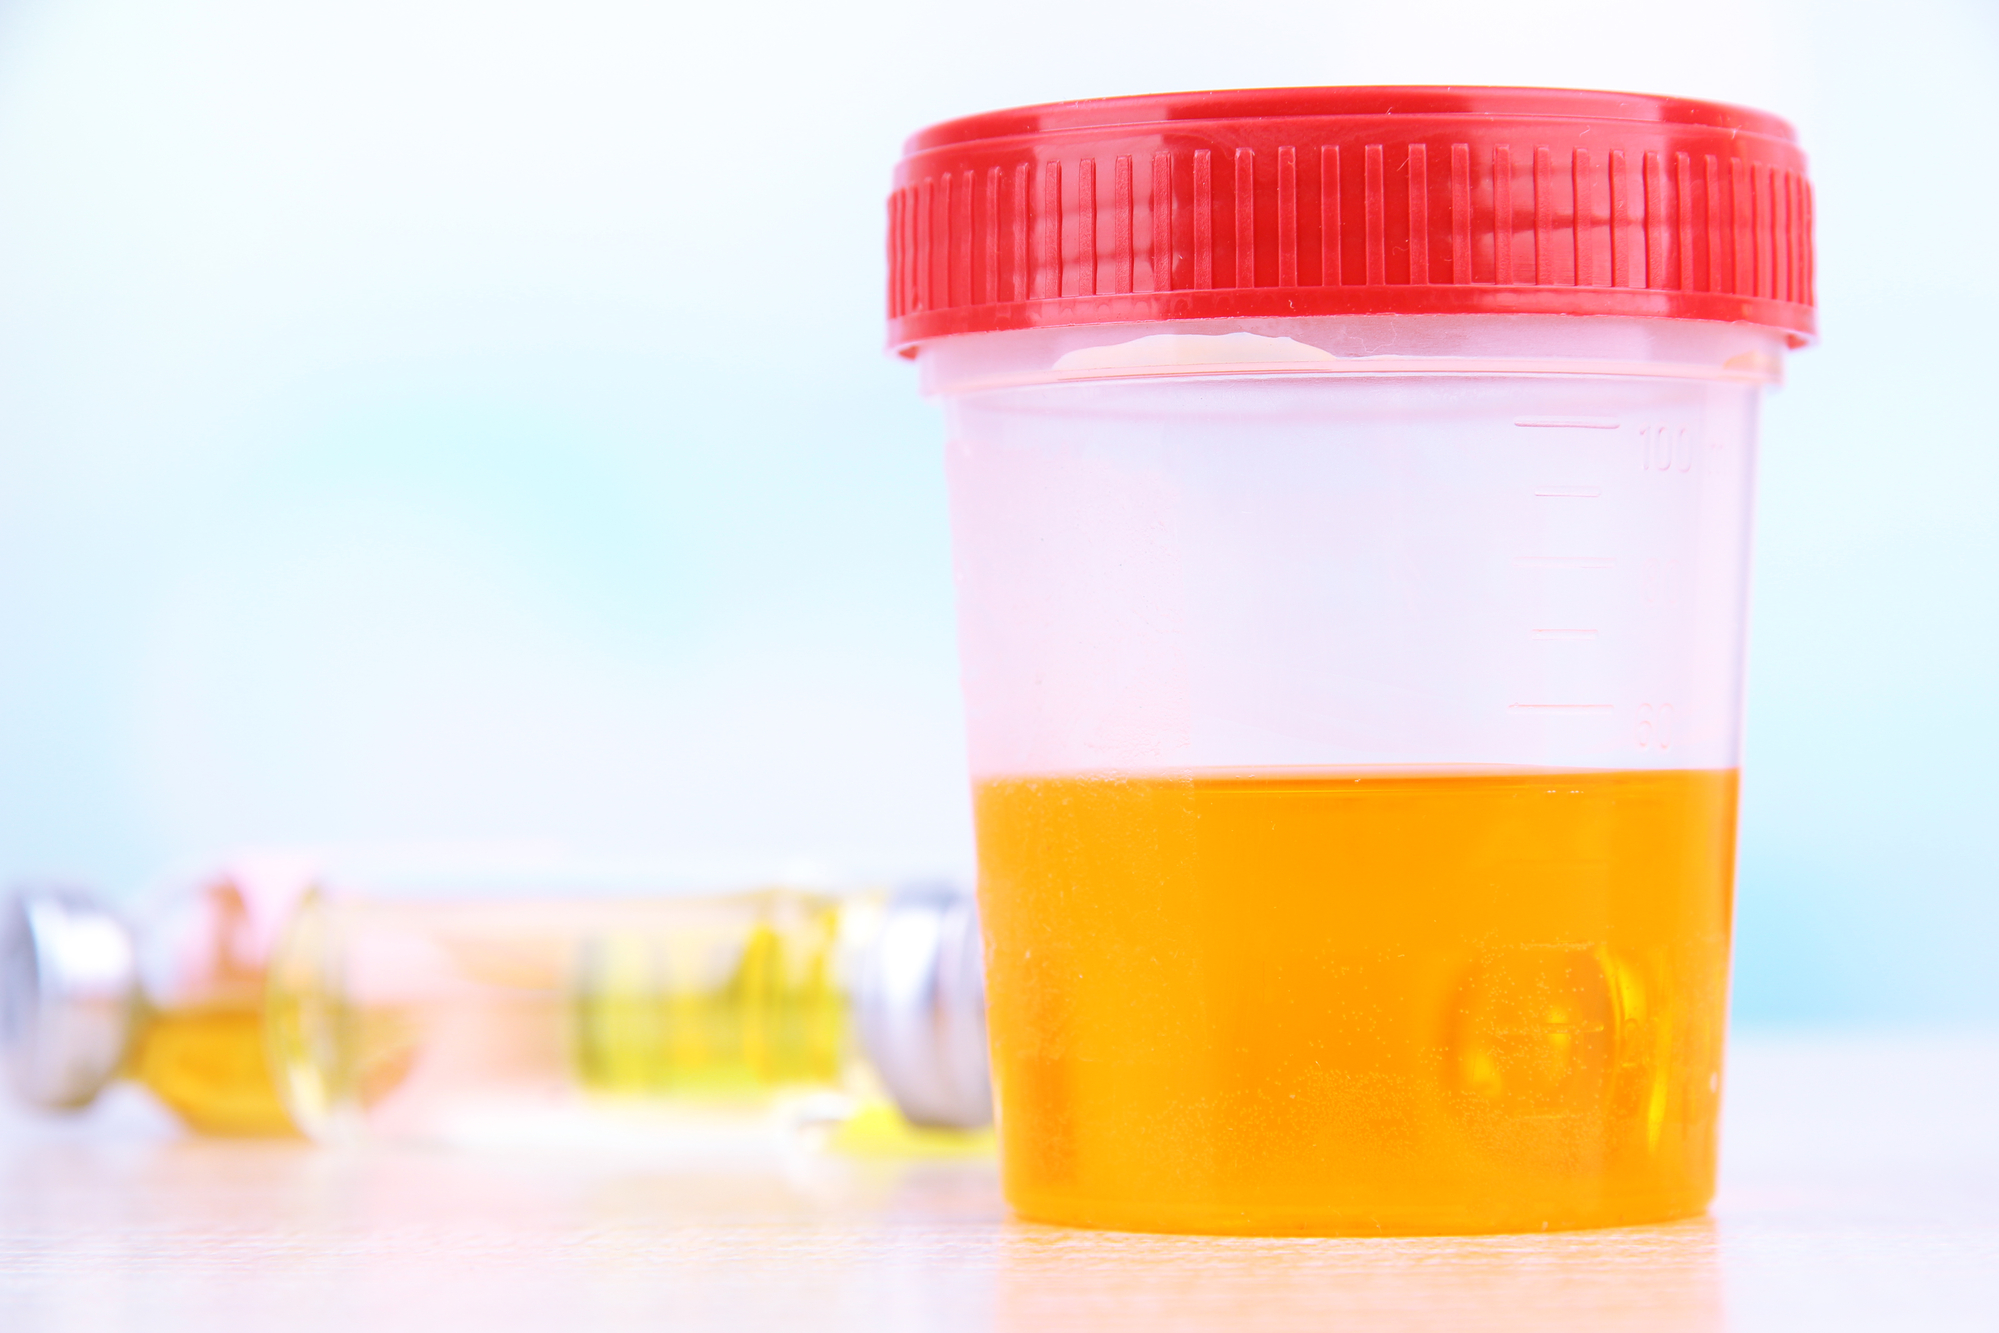 Close-up of a plastic cup with a red lid containing a urine sample.